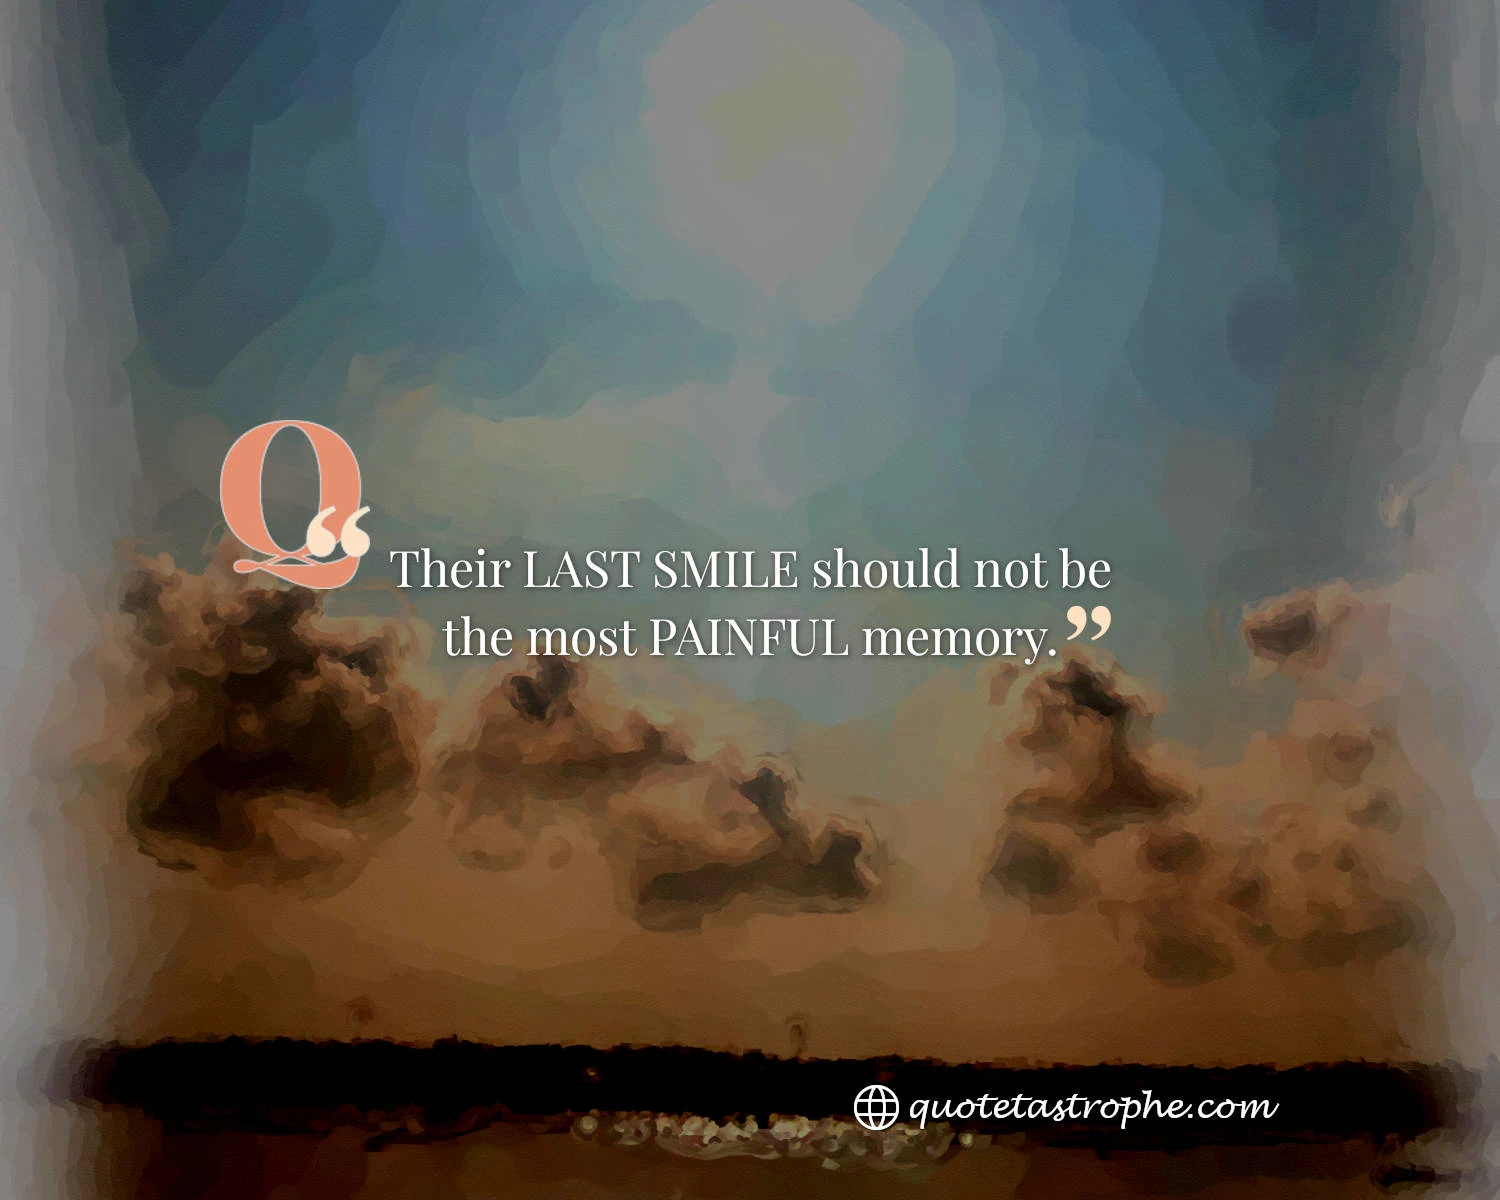 Their Last Smile Should Not Be Painful